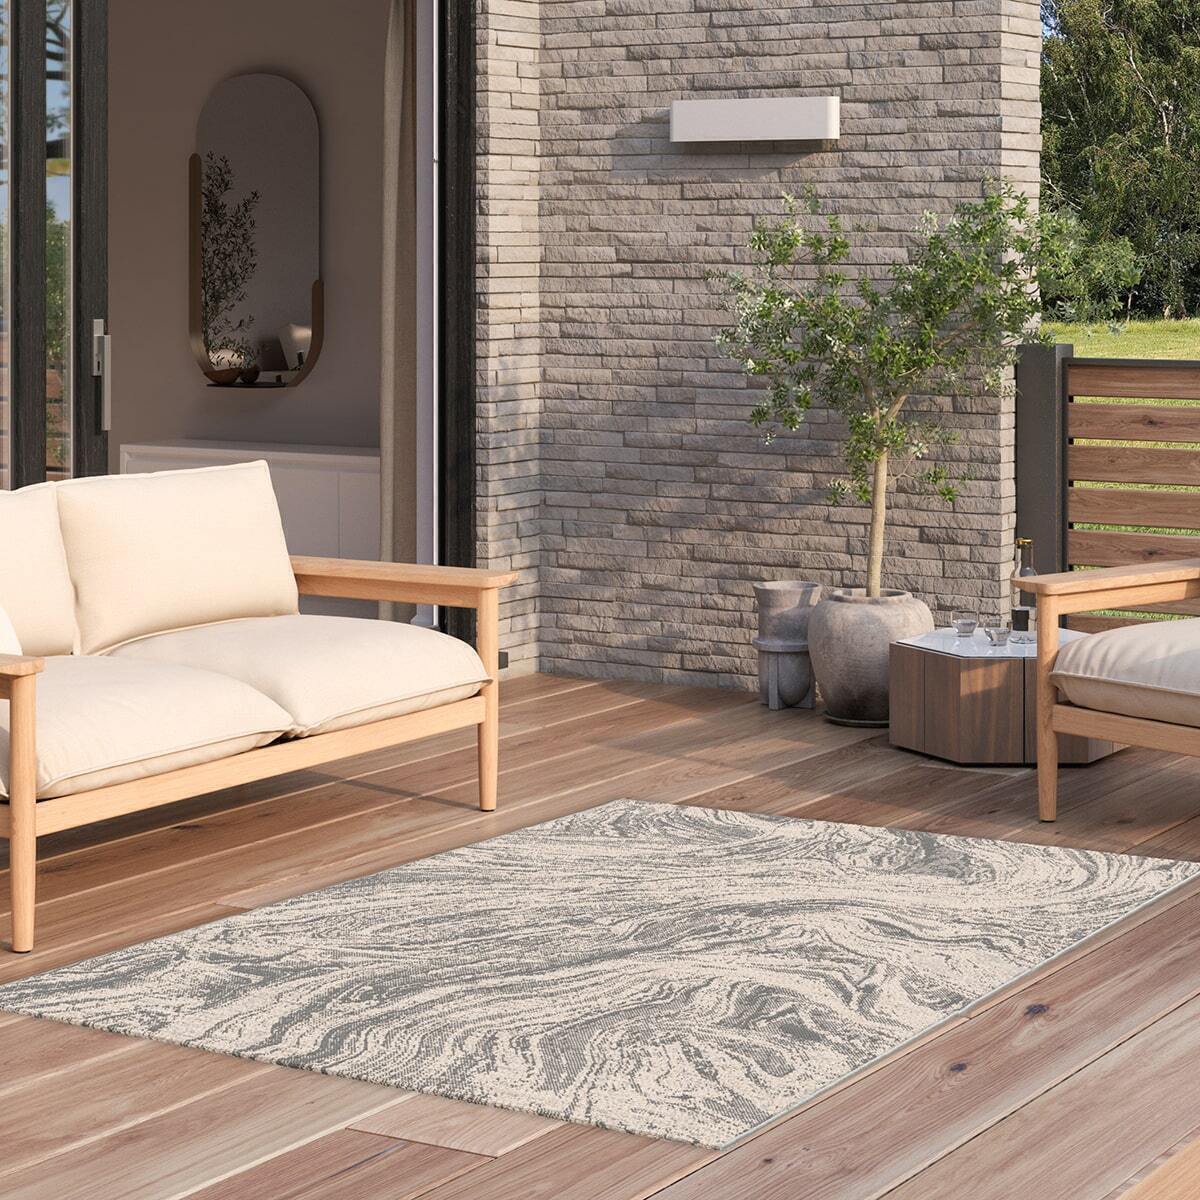 Maze - Cloud Marble Indoor and Outdoor Rug - 200x290cm product image